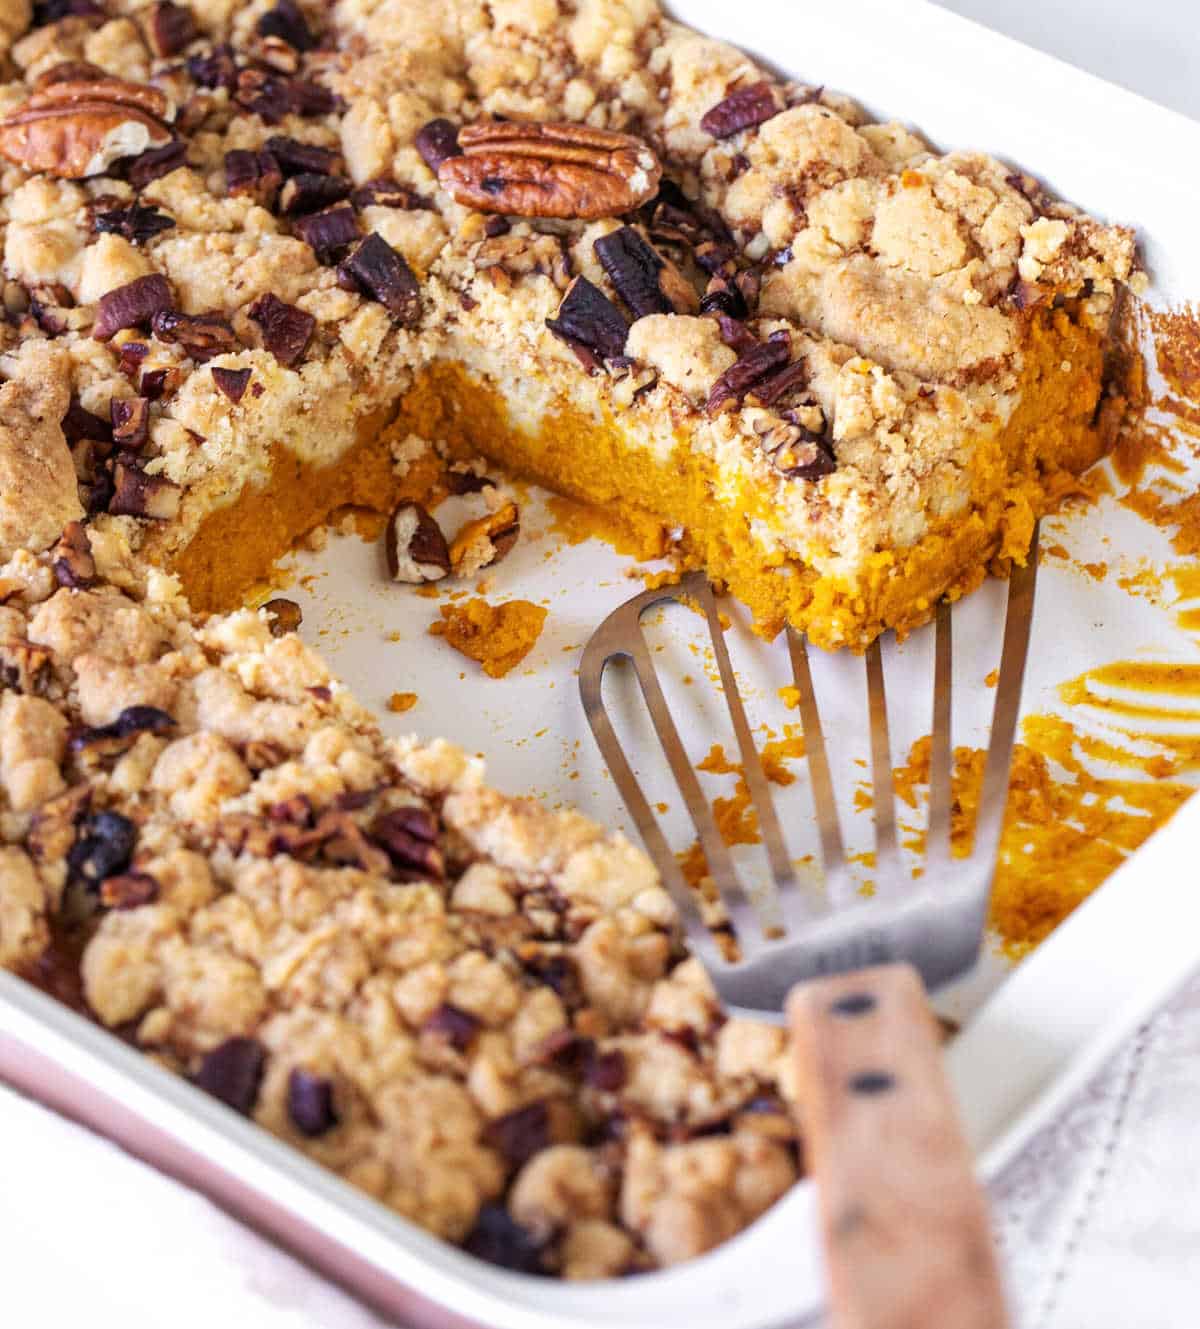 Close of baking dish with pumpkin crumb cake, portions missing, a metal serving spatula.